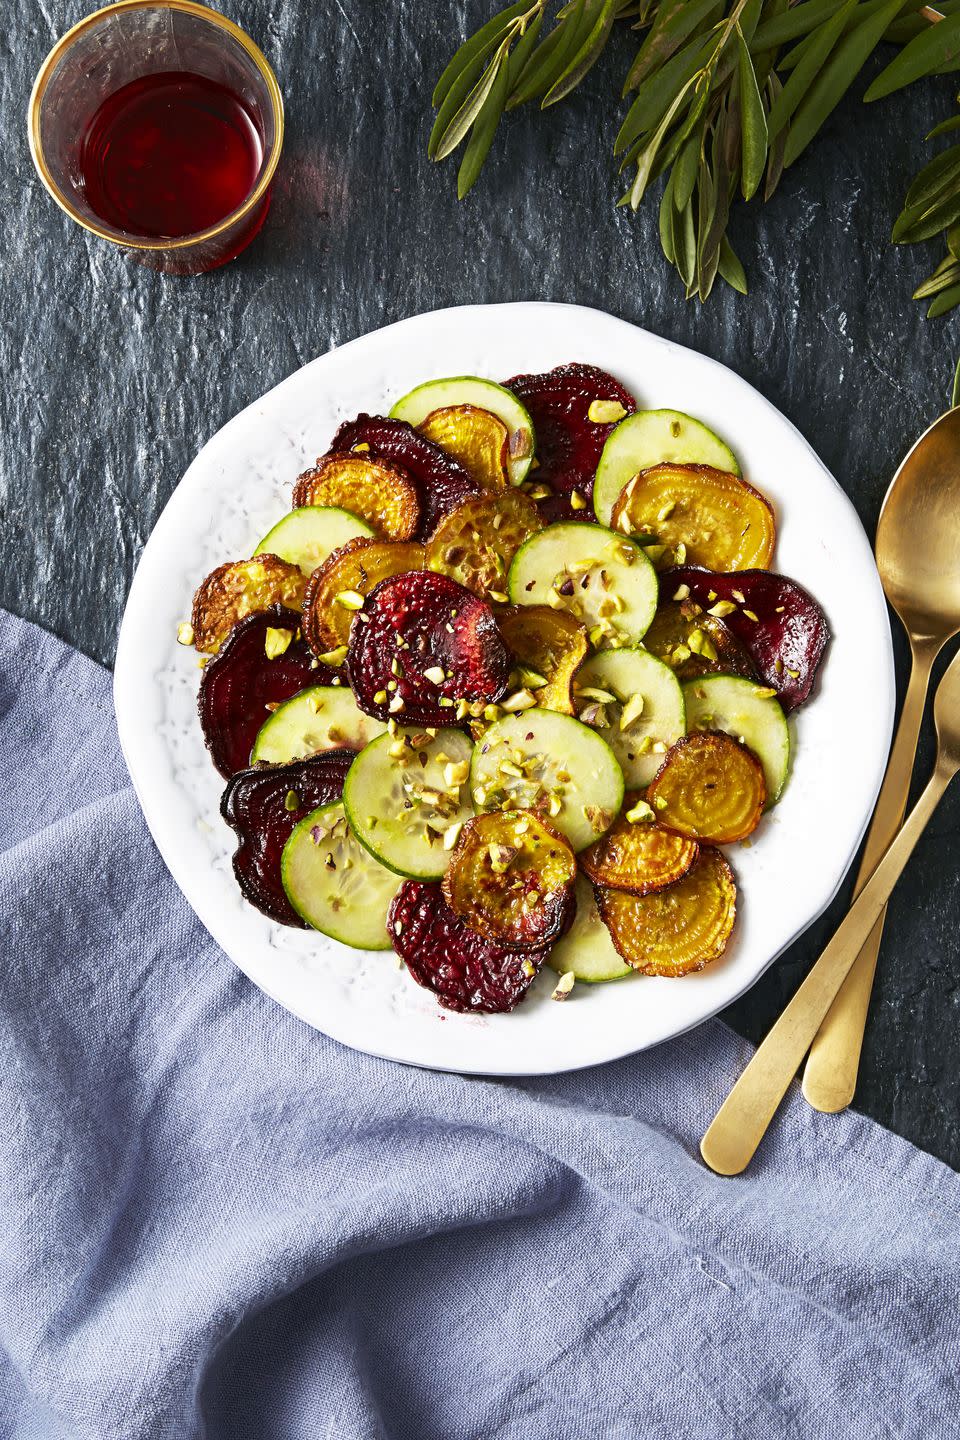 <p>Beets, cucumber and salted pistachios come together to make a tasty (and healthy!) light salad. </p><p>Get the<strong> <a href="https://www.goodhousekeeping.com/food-recipes/a35792/cucumber-roasted-beet-and-pistachio-salad/" rel="nofollow noopener" target="_blank" data-ylk="slk:Cucumber Roasted-Beet and Pistachio Salad recipe" class="link ">Cucumber Roasted-Beet and Pistachio Salad recipe</a></strong>. </p>